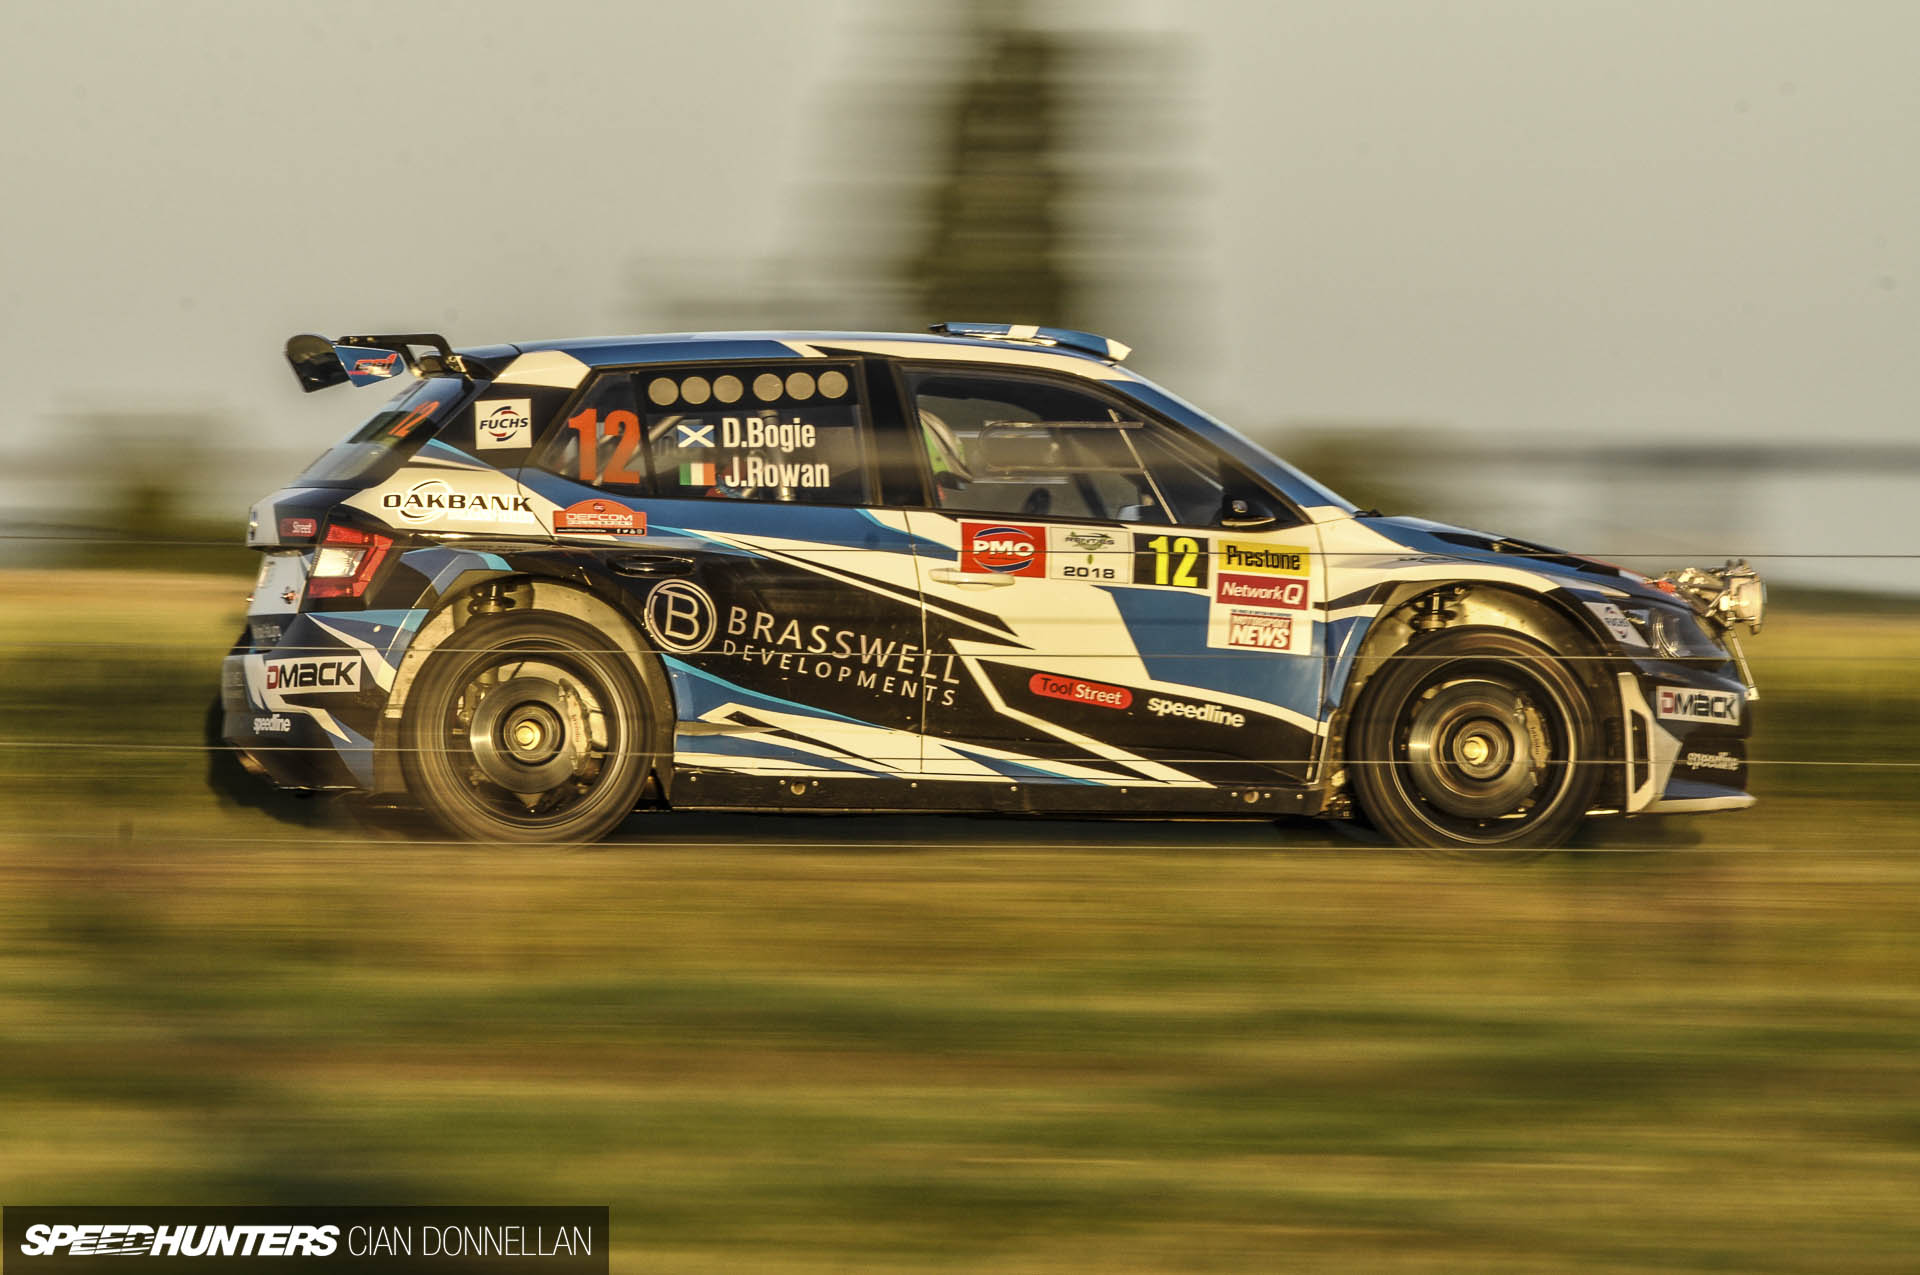 Big Cuts & Ditch Hunting At Rally Ypres - Speedhunters